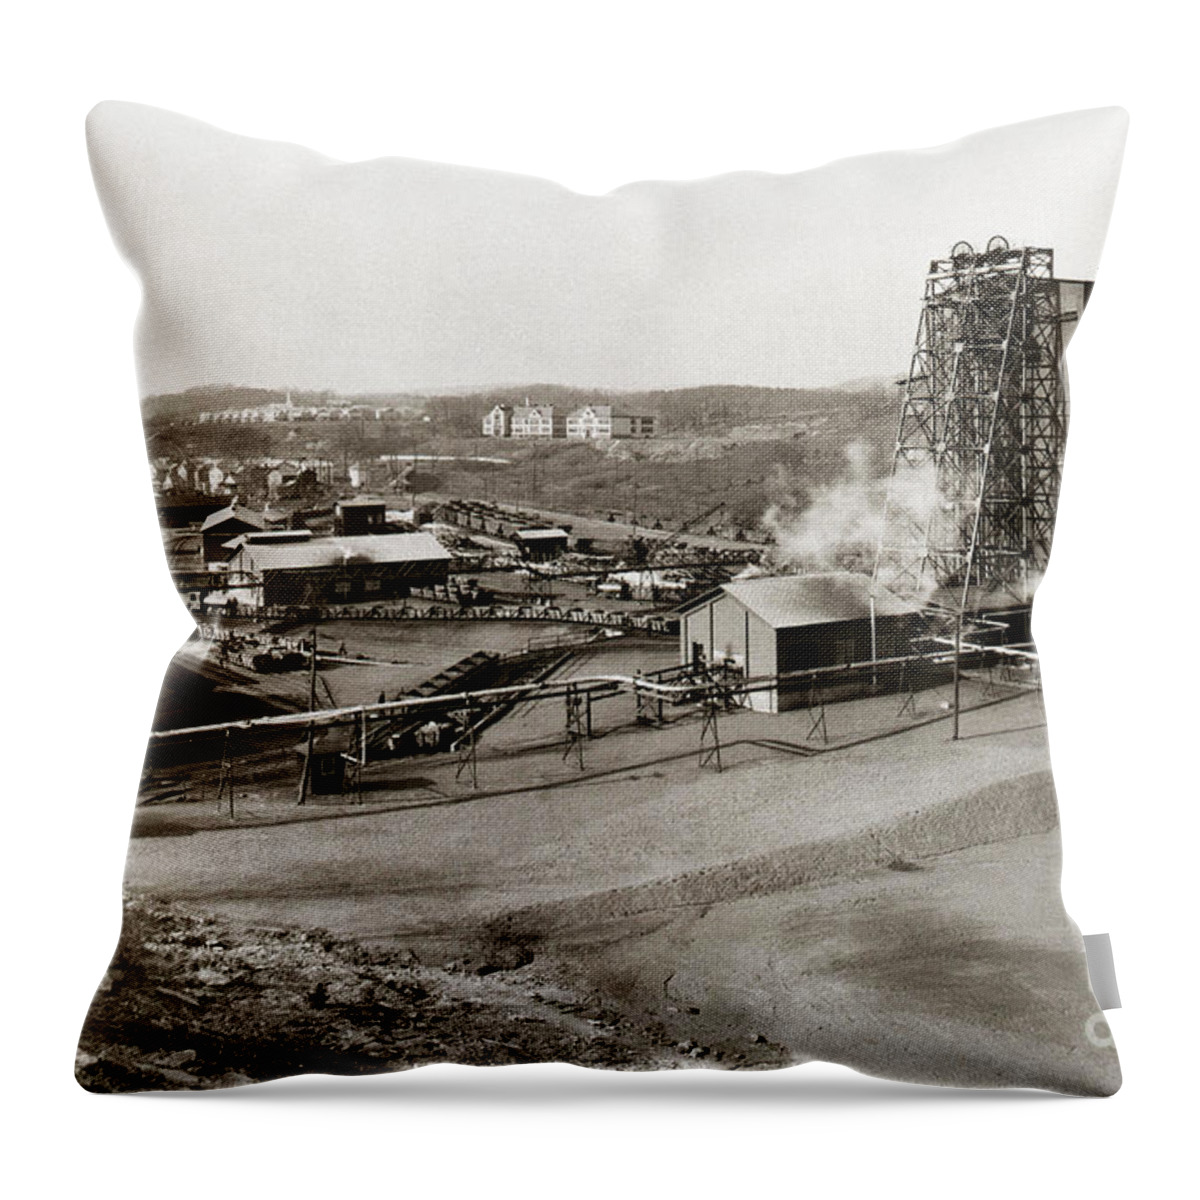  Wanamie Colliery Throw Pillow featuring the photograph The Wanamie Colliery Lehigh and Wilkes Barre Coal Co Wanamie PA early 1900s by Arthur Miller